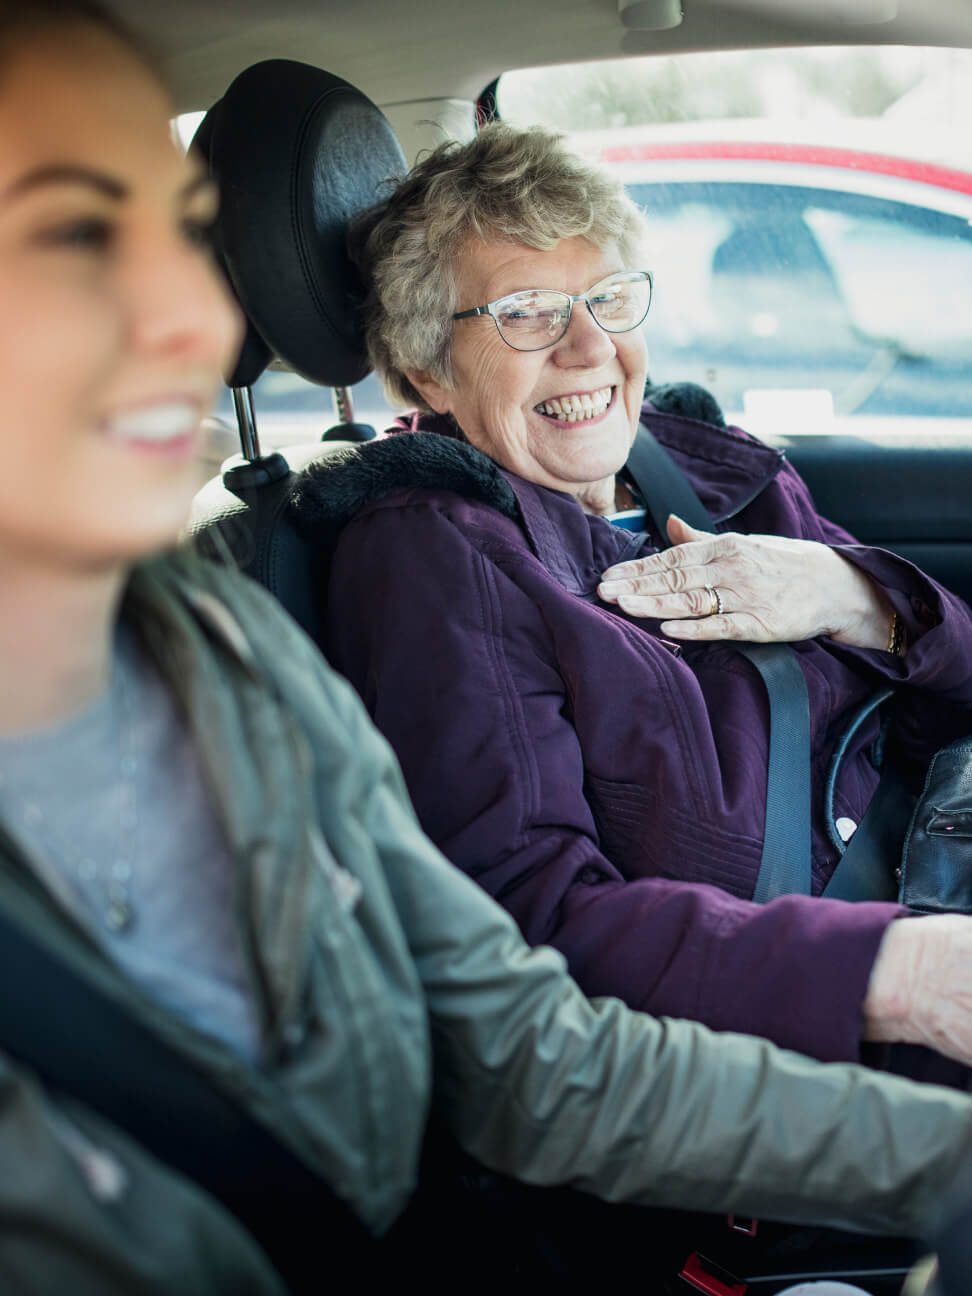 Elderly woman looking happy to be getting driven around by her companion caregiver to run errands